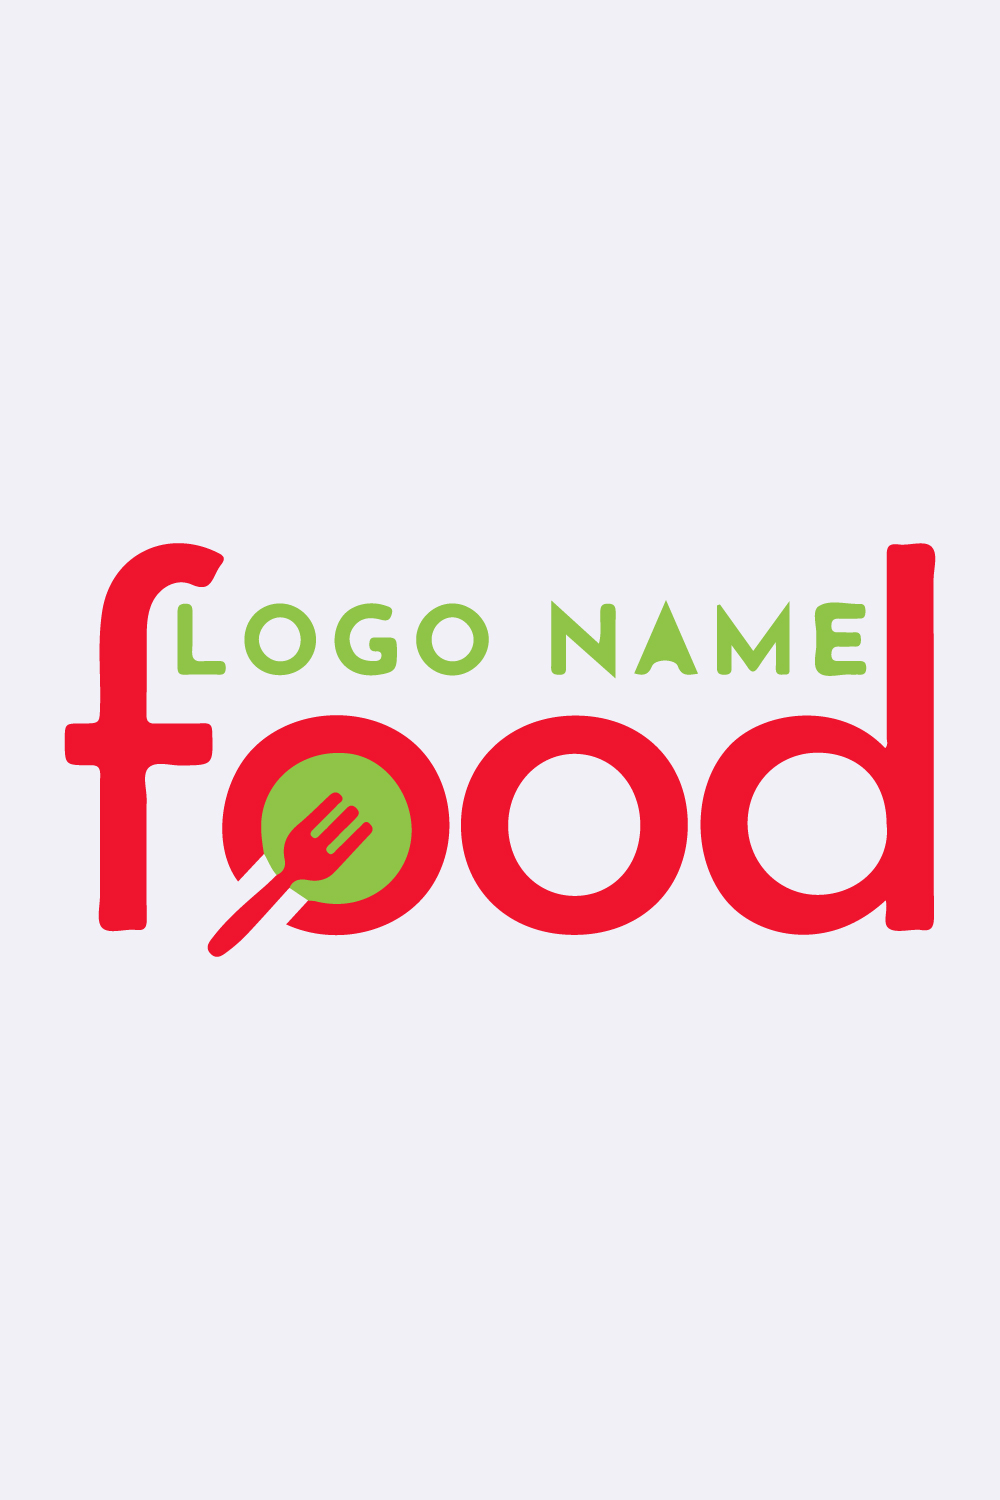 A Food logo design for your pinterest preview image.